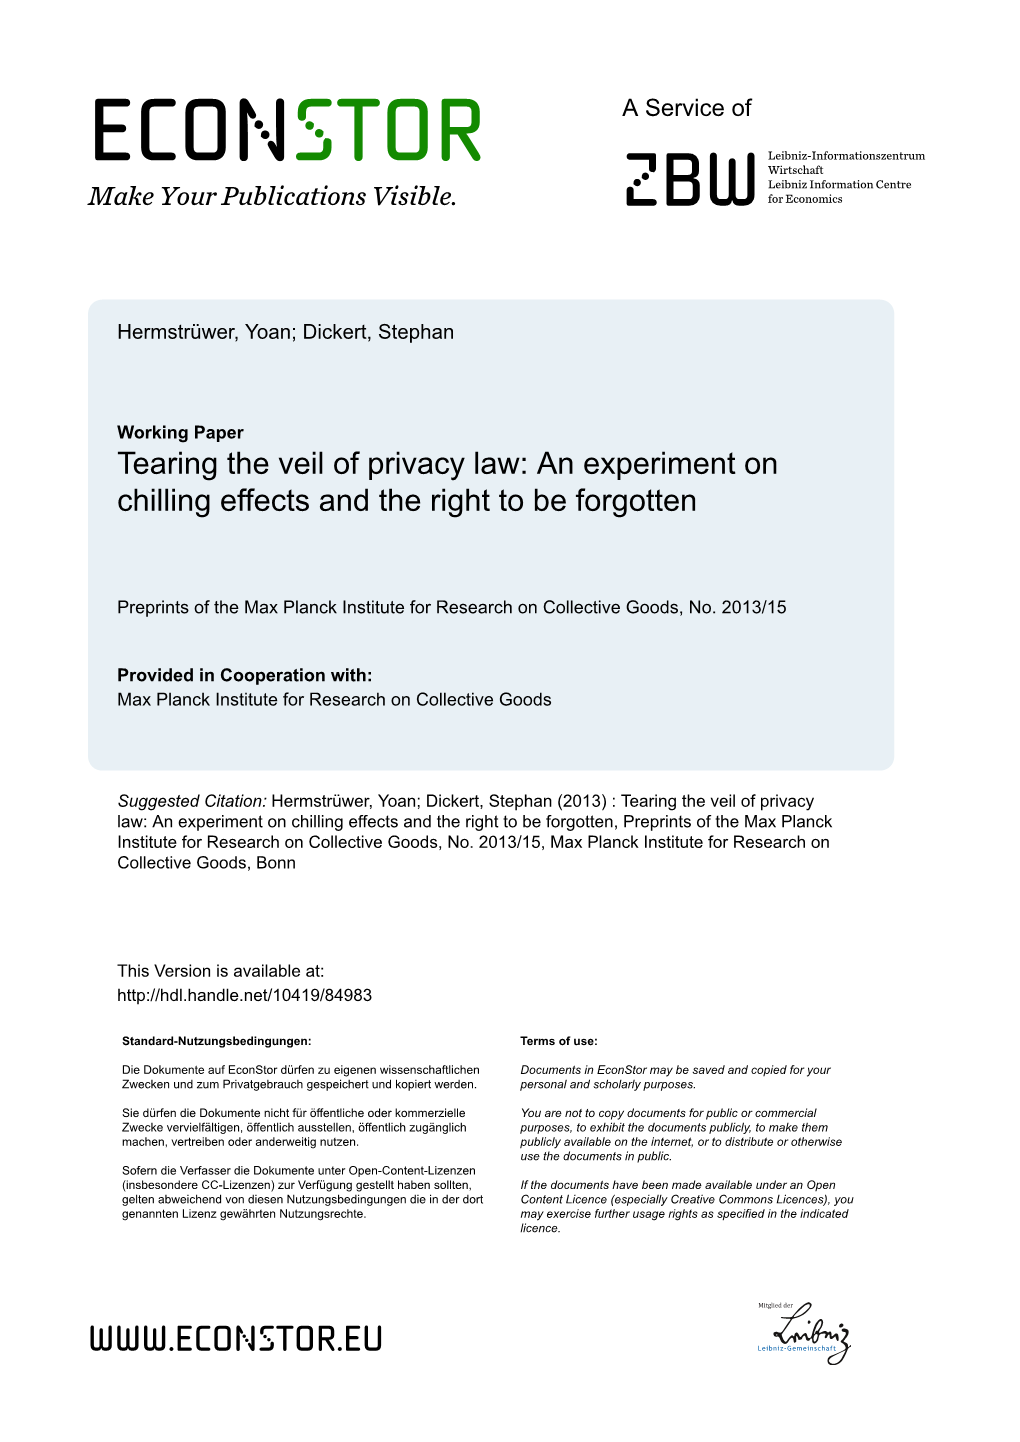 Tearing the Veil of Privacy Law: an Experiment on Chilling Effects and the Right to Be Forgotten